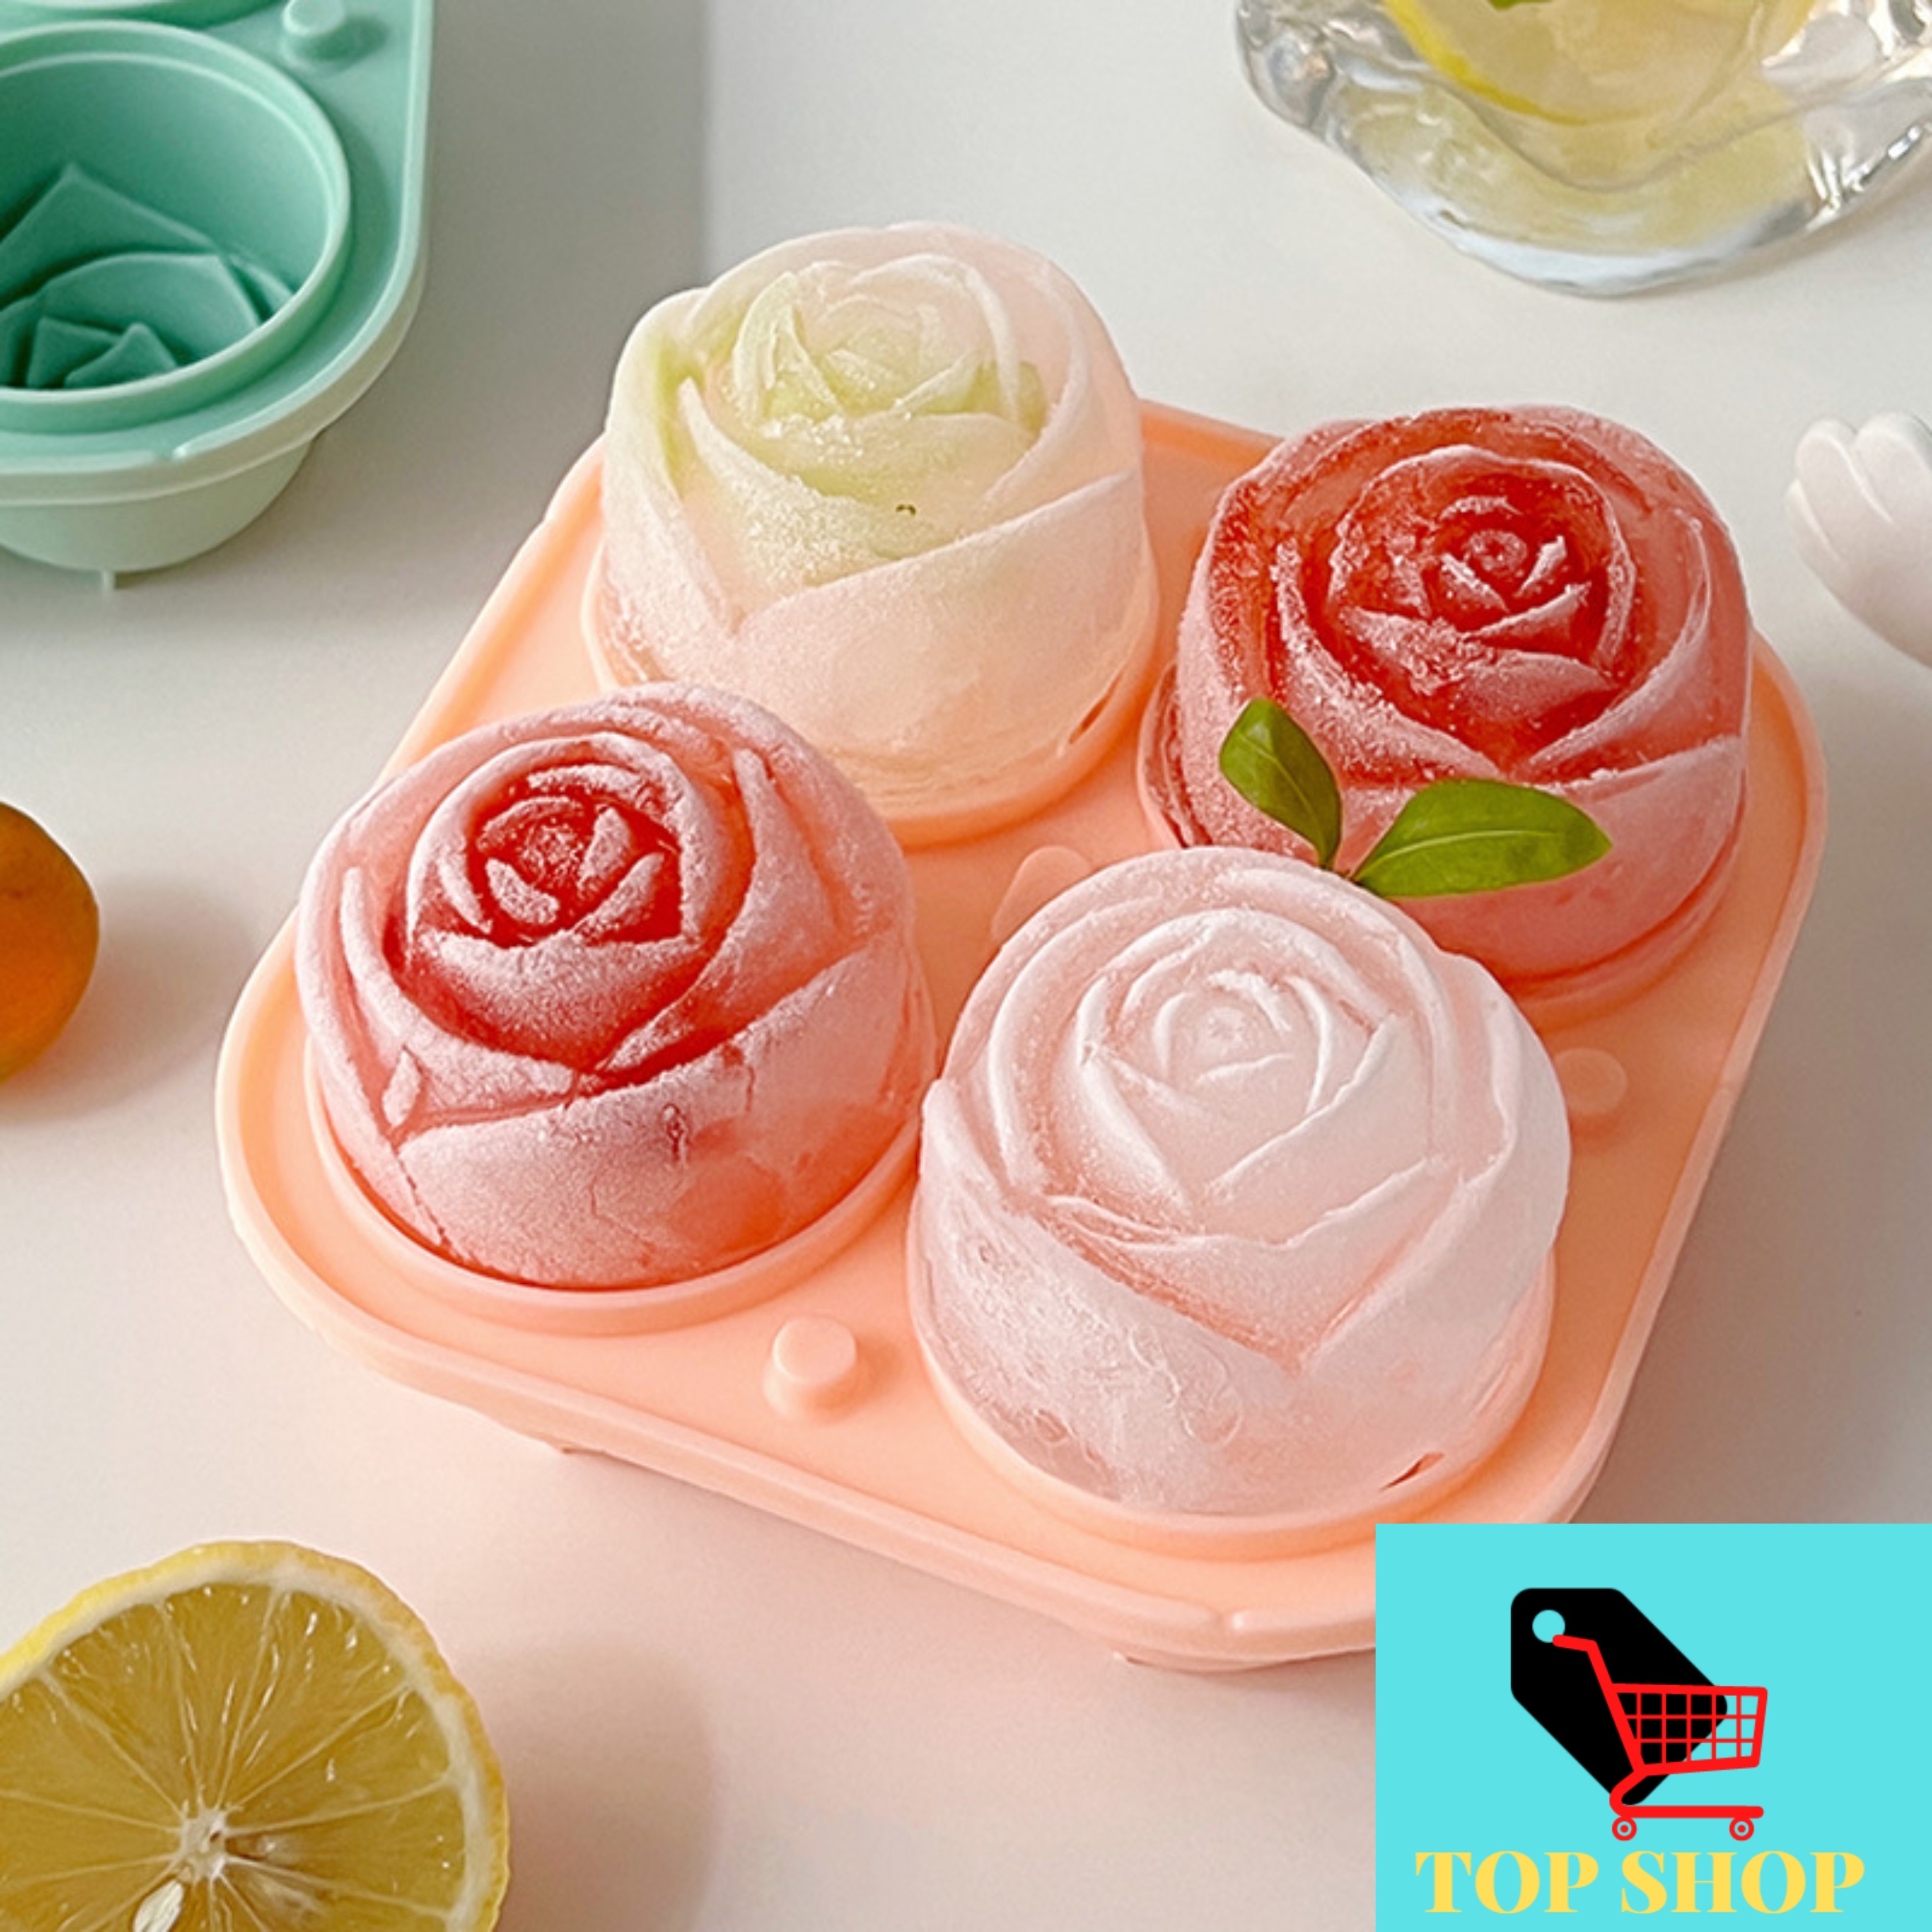 4 In 1 3D Rose Ice Maker With Large Flower Shape Pink Mold On Food And  Silicone Rubber Trays Perfect For Fun And Cute Ice Balls From Smyy666,  $3.02